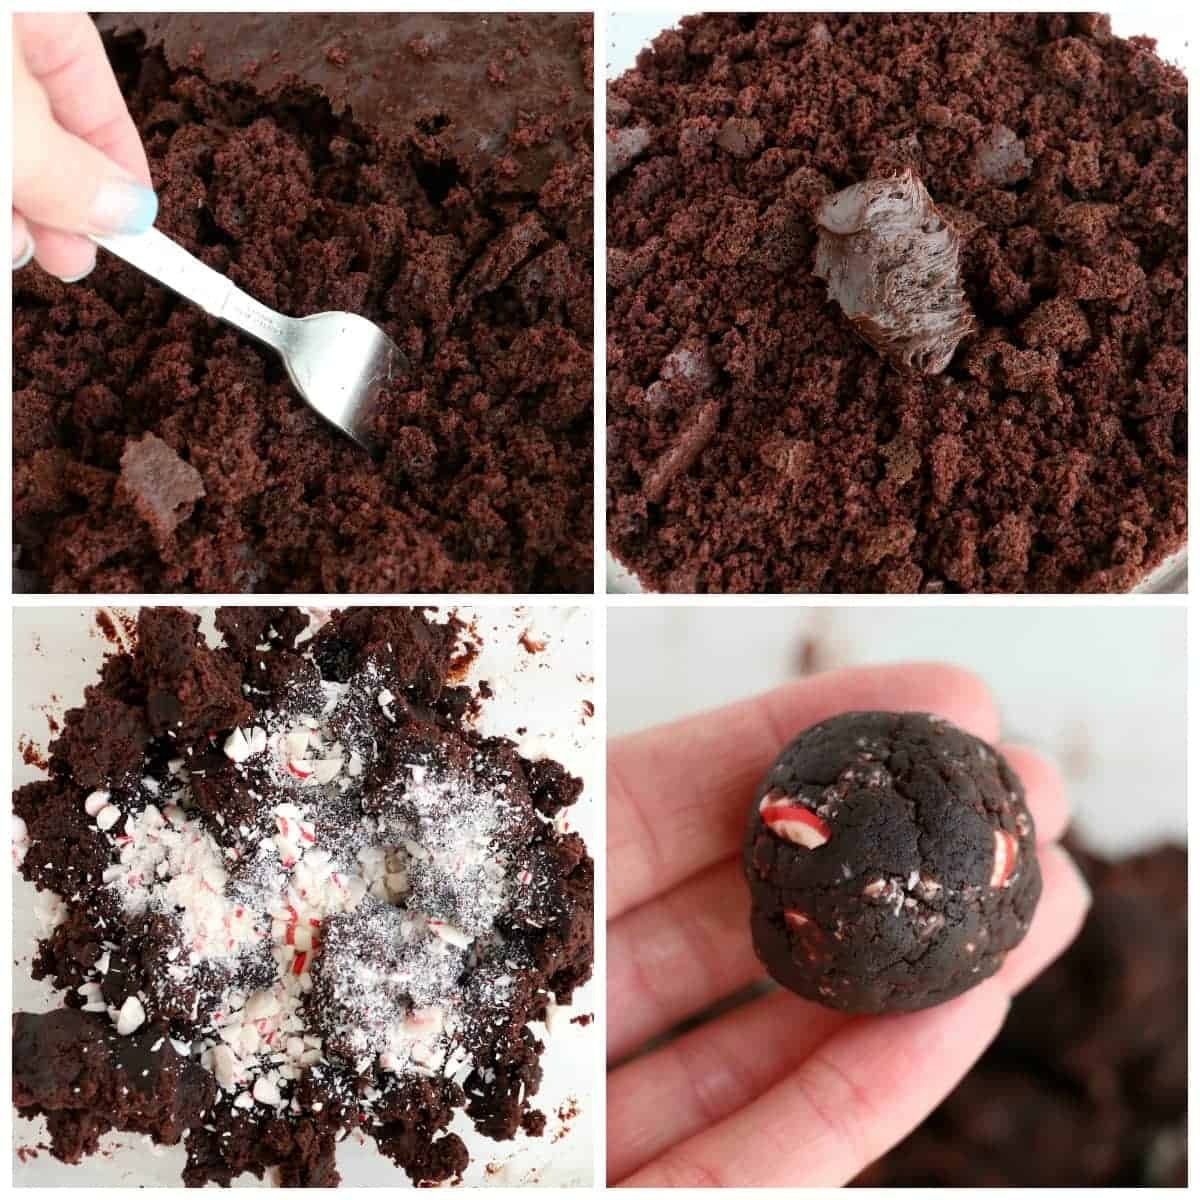 Four process photos. First one, baked choclate cake being crumbled with a fork. Second one, chocolate frosting mixed into the crumbled chocolate cake. Third one, crunched peppermint candies mixed into the truffle batter. Fourth one, cake truffle rolled into a ball and held in a hand.